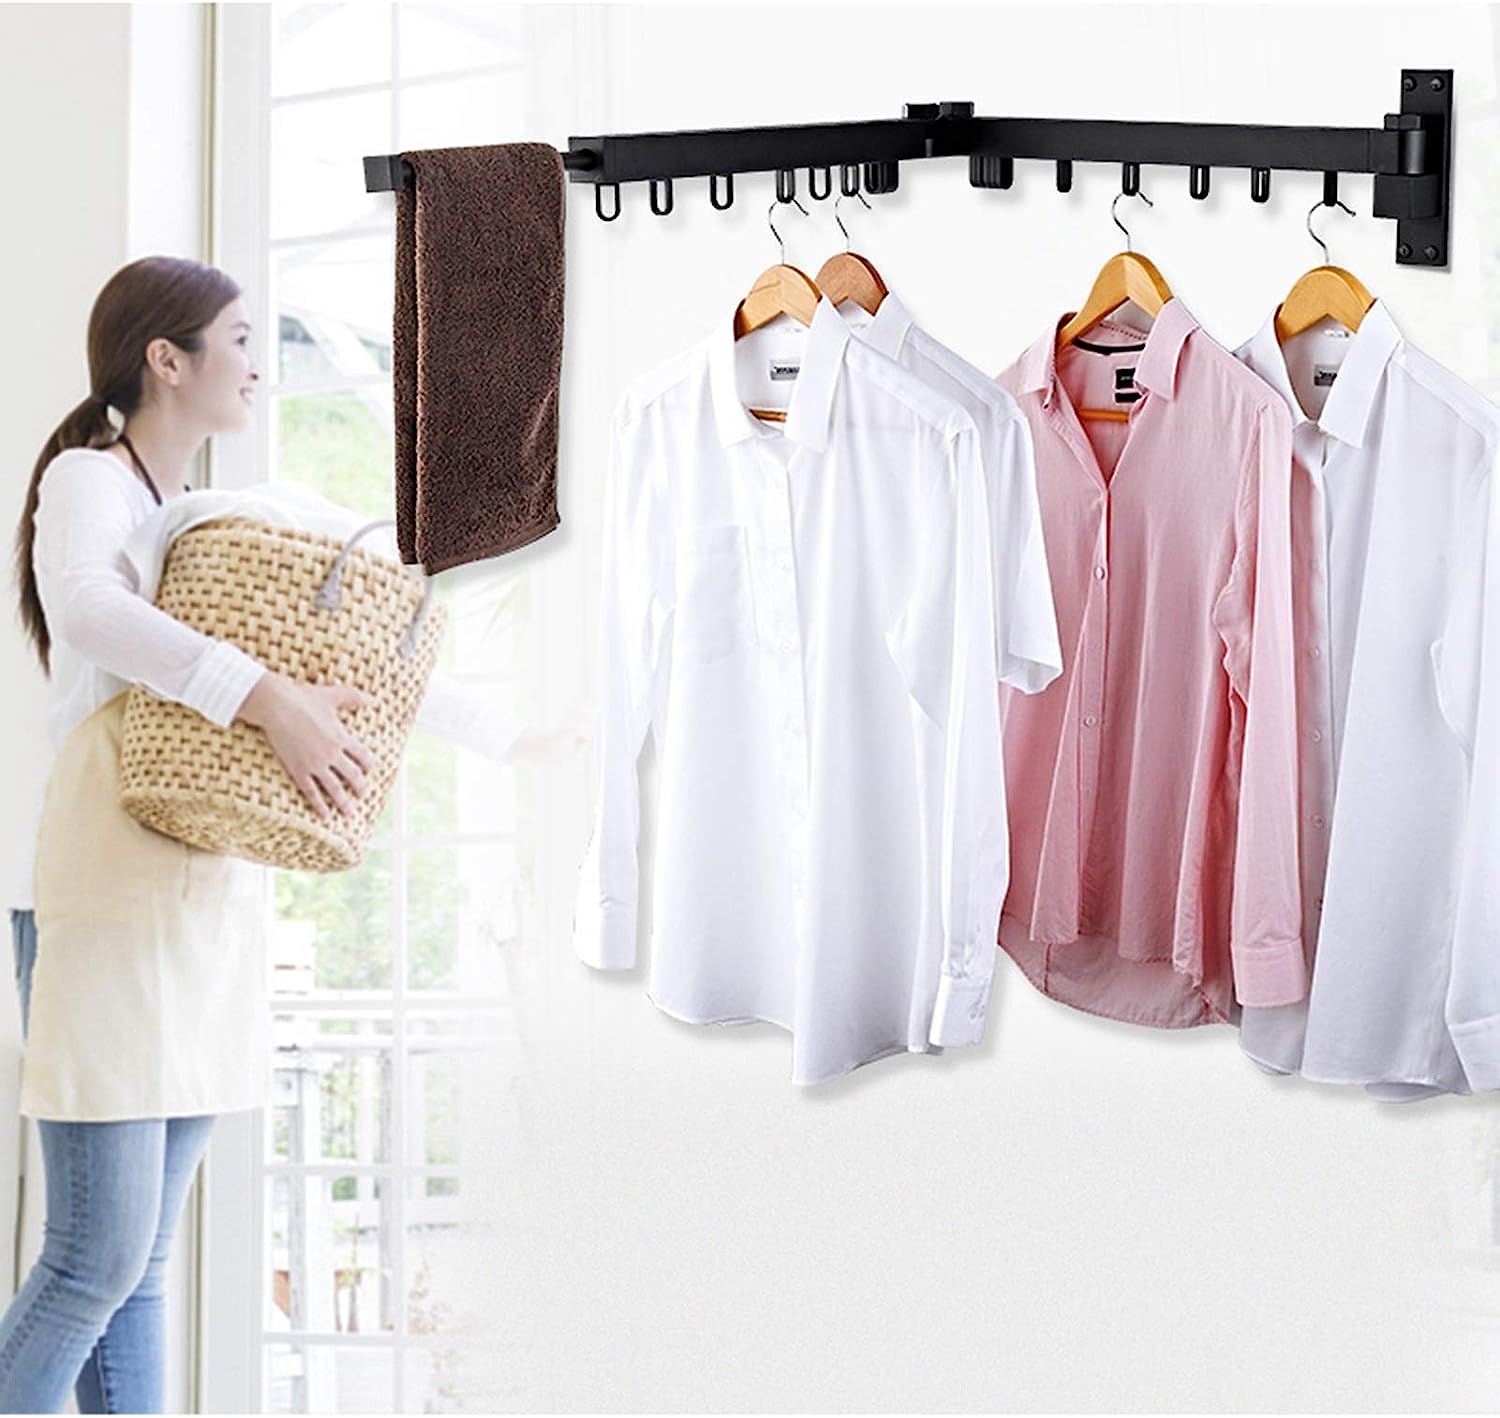 Extended Collapsible Drying Hanger mounted on a wall with shirts hung on it 